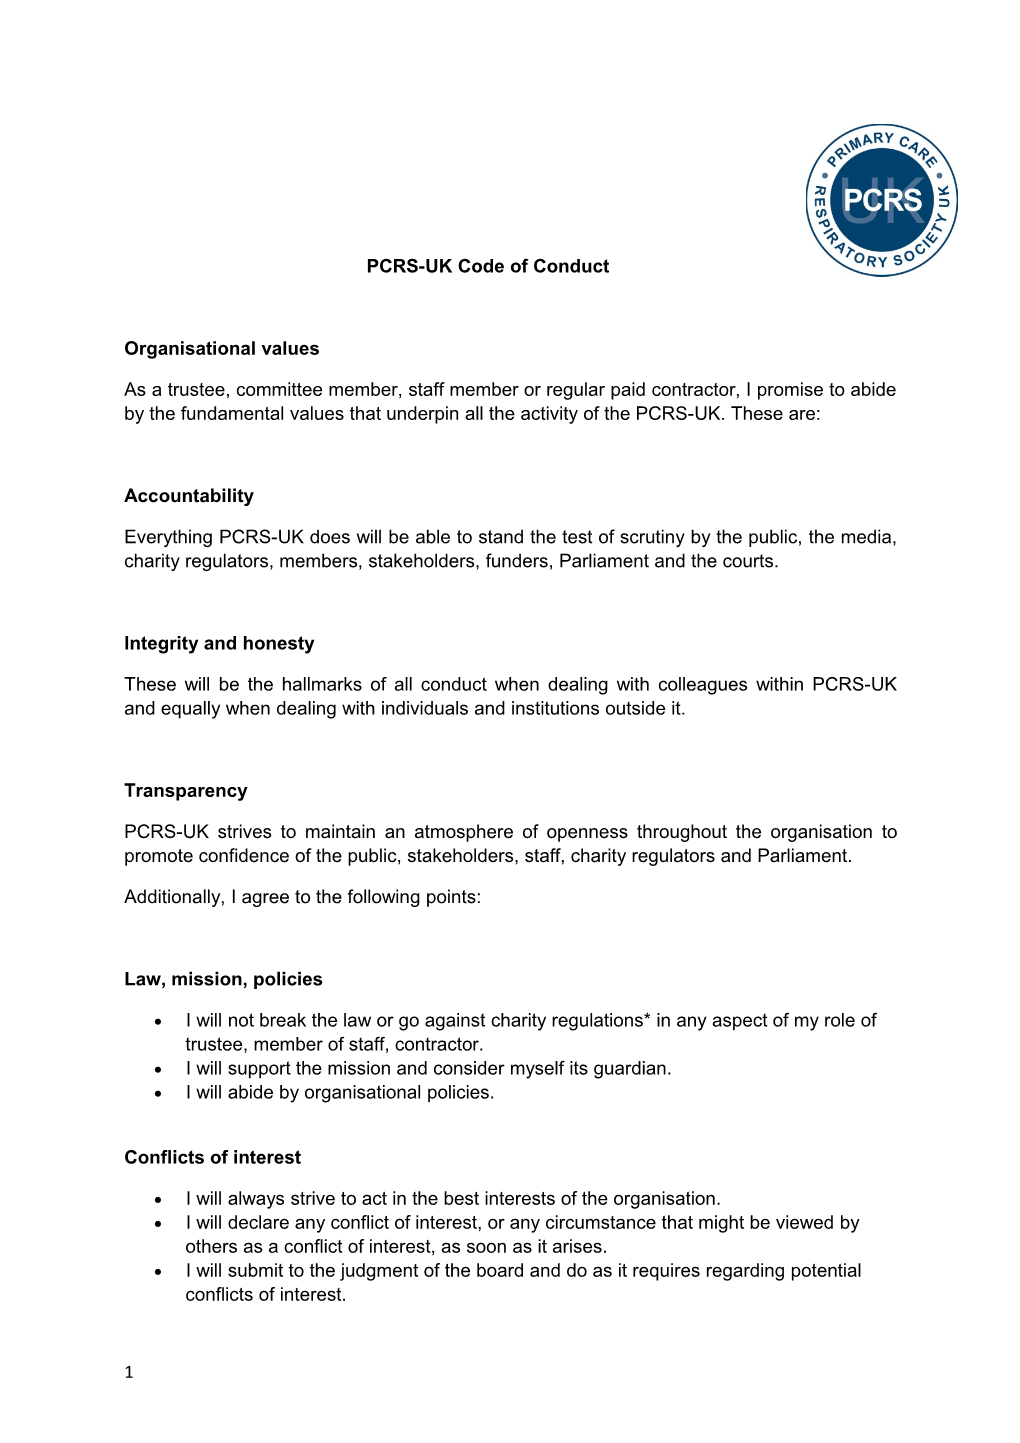 PCRS-UK Code of Conduct